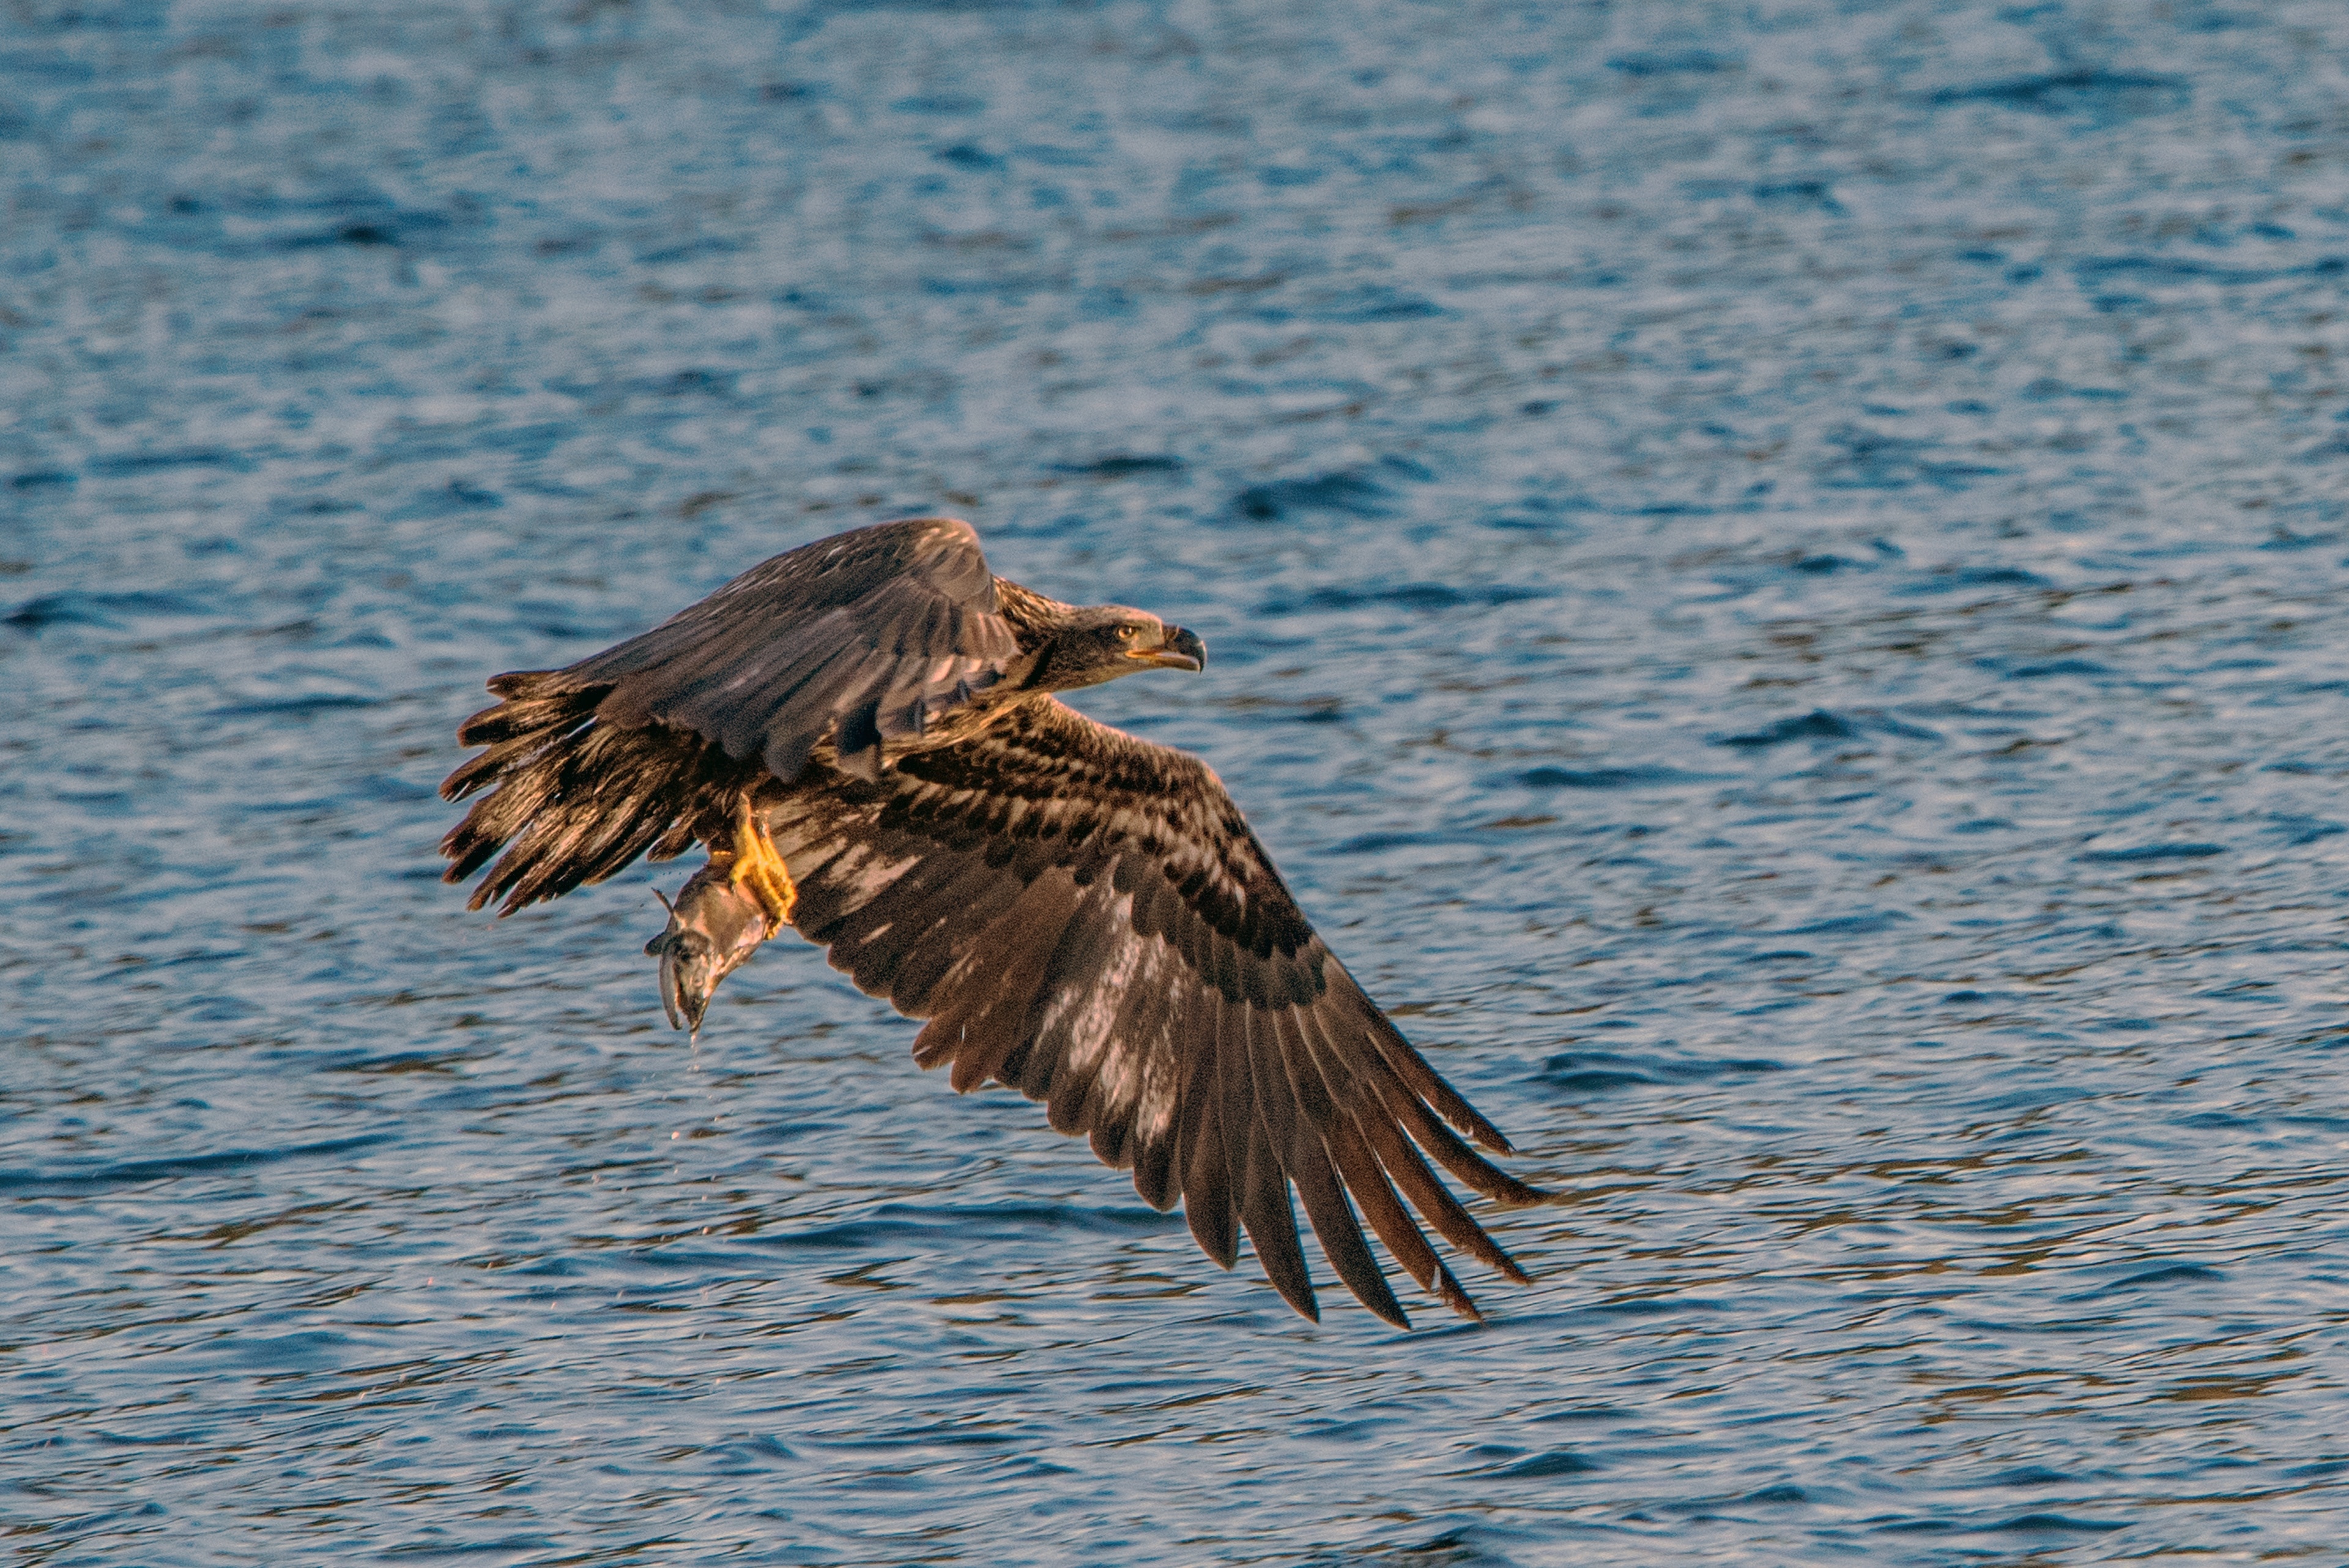 Watching the eagle migration on Lake Coeur d'Alene, this young juvenile exhibited excellent hunting skills as he snatched a Kokanee from the water.
#wildlife
#nature
#eagle
#eagle_with_fish